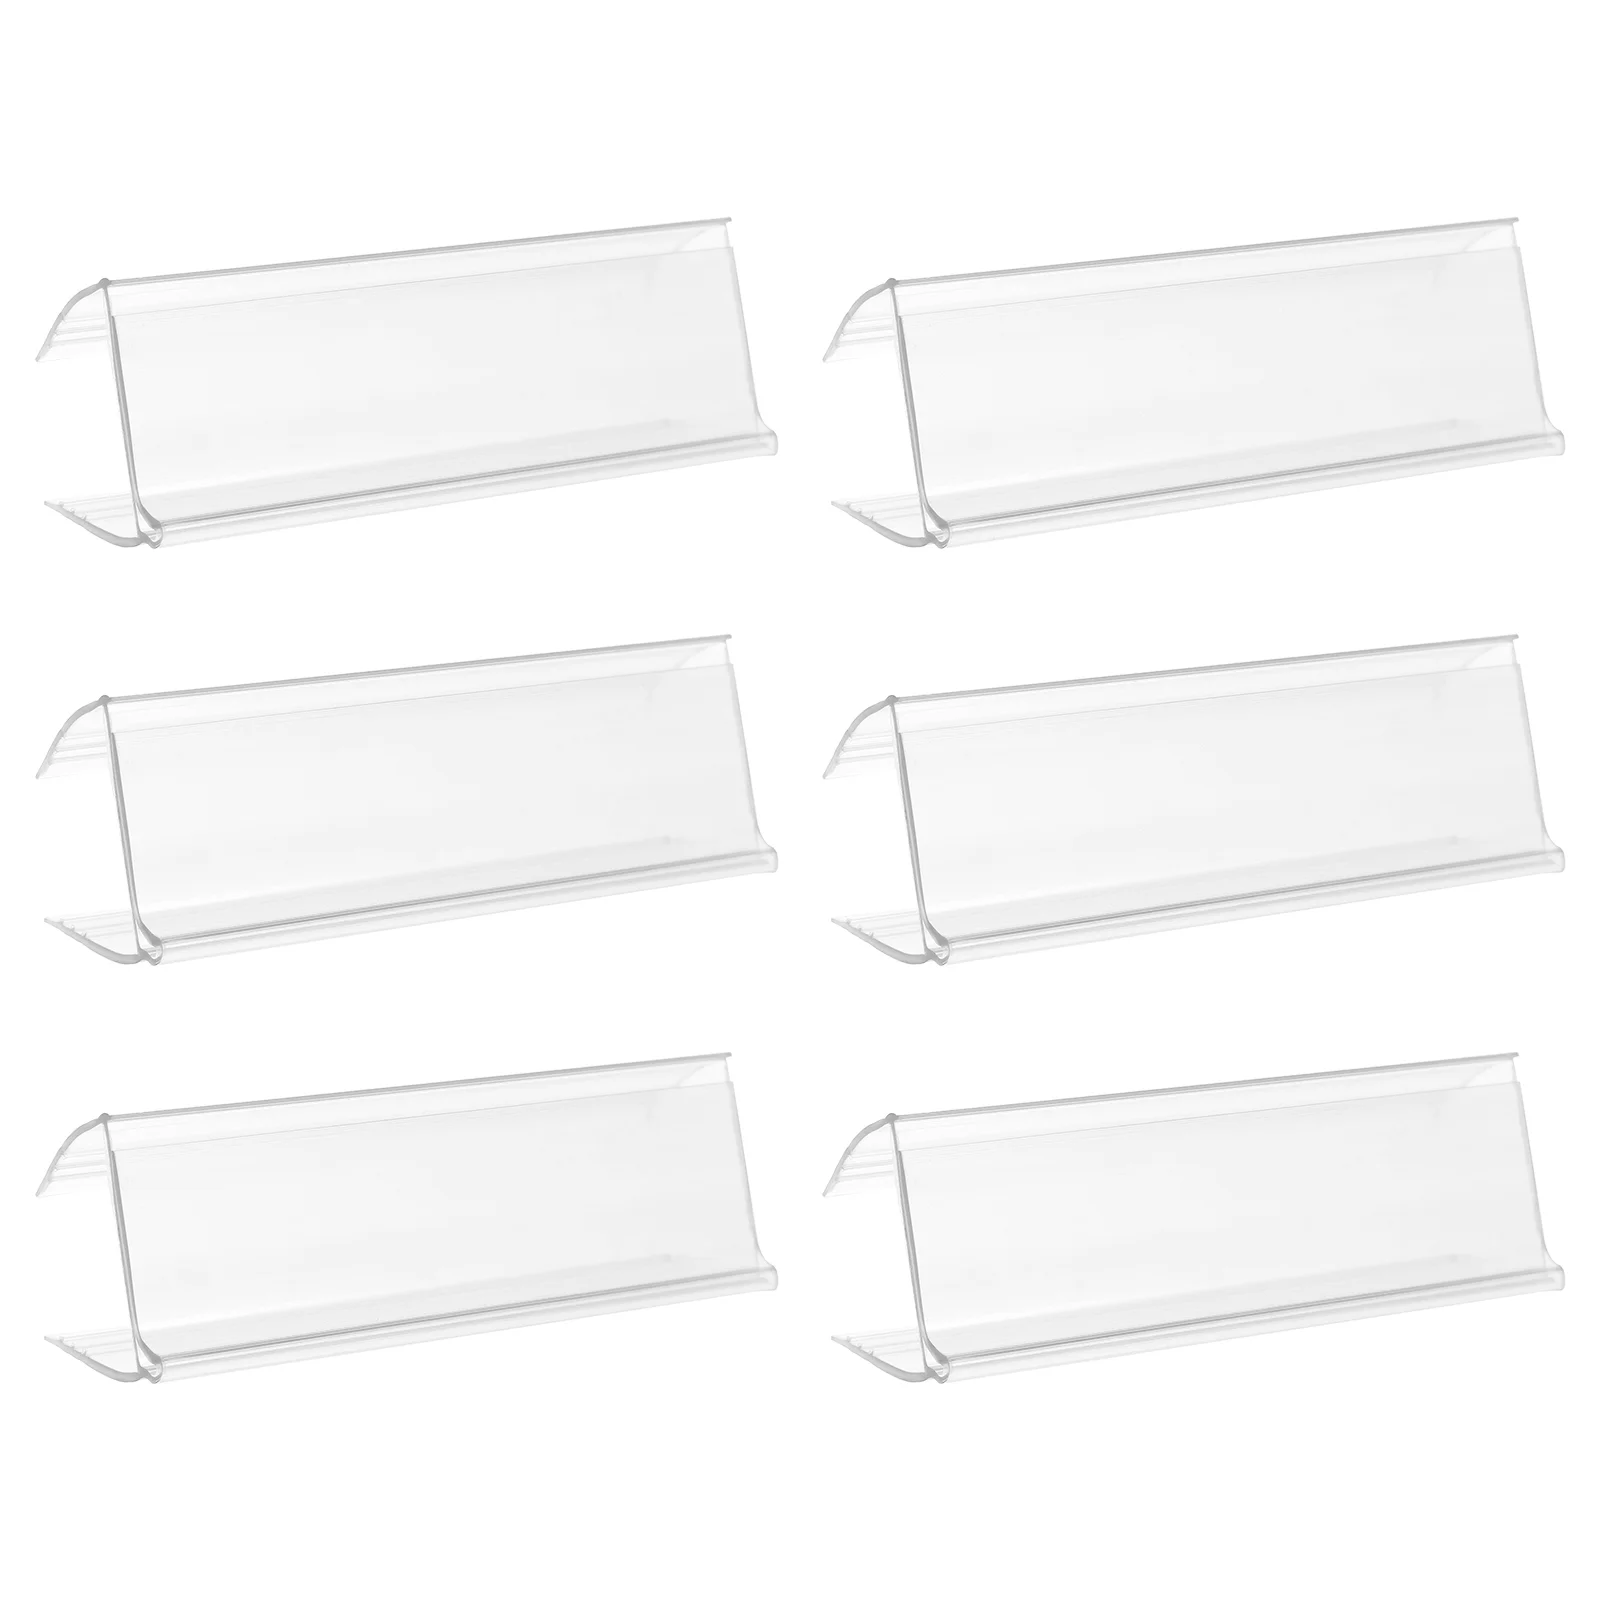 

6 Pcs Tag Label Slot Shelf Labels Merchandise Sign Display Holder Price Holders Card Displaying Stand Wear-resistant